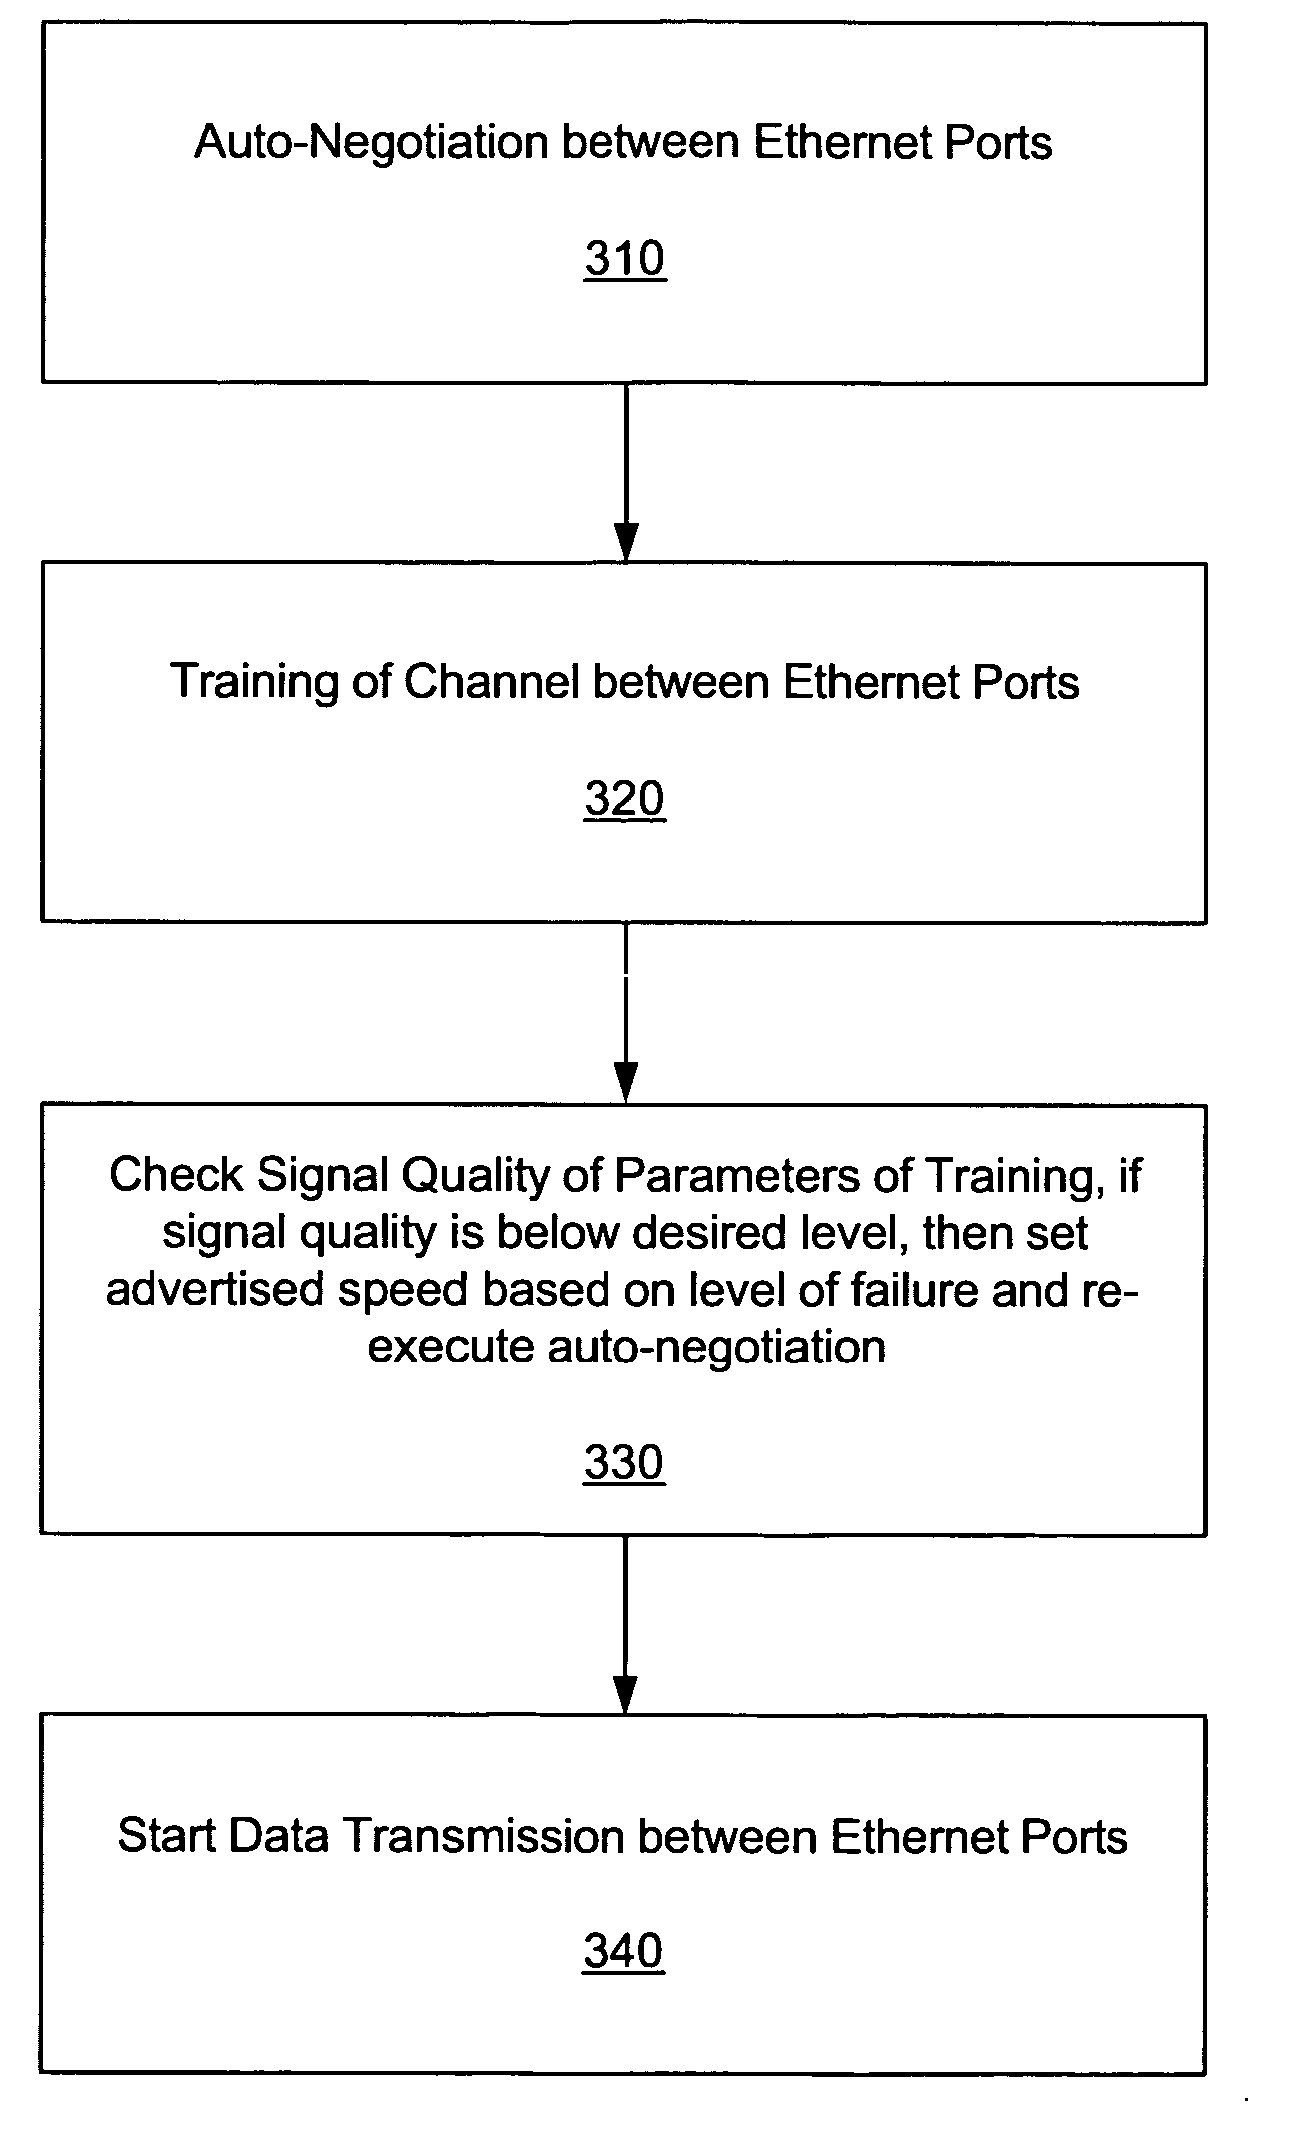 Auto-sequencing transmission speed of a data port